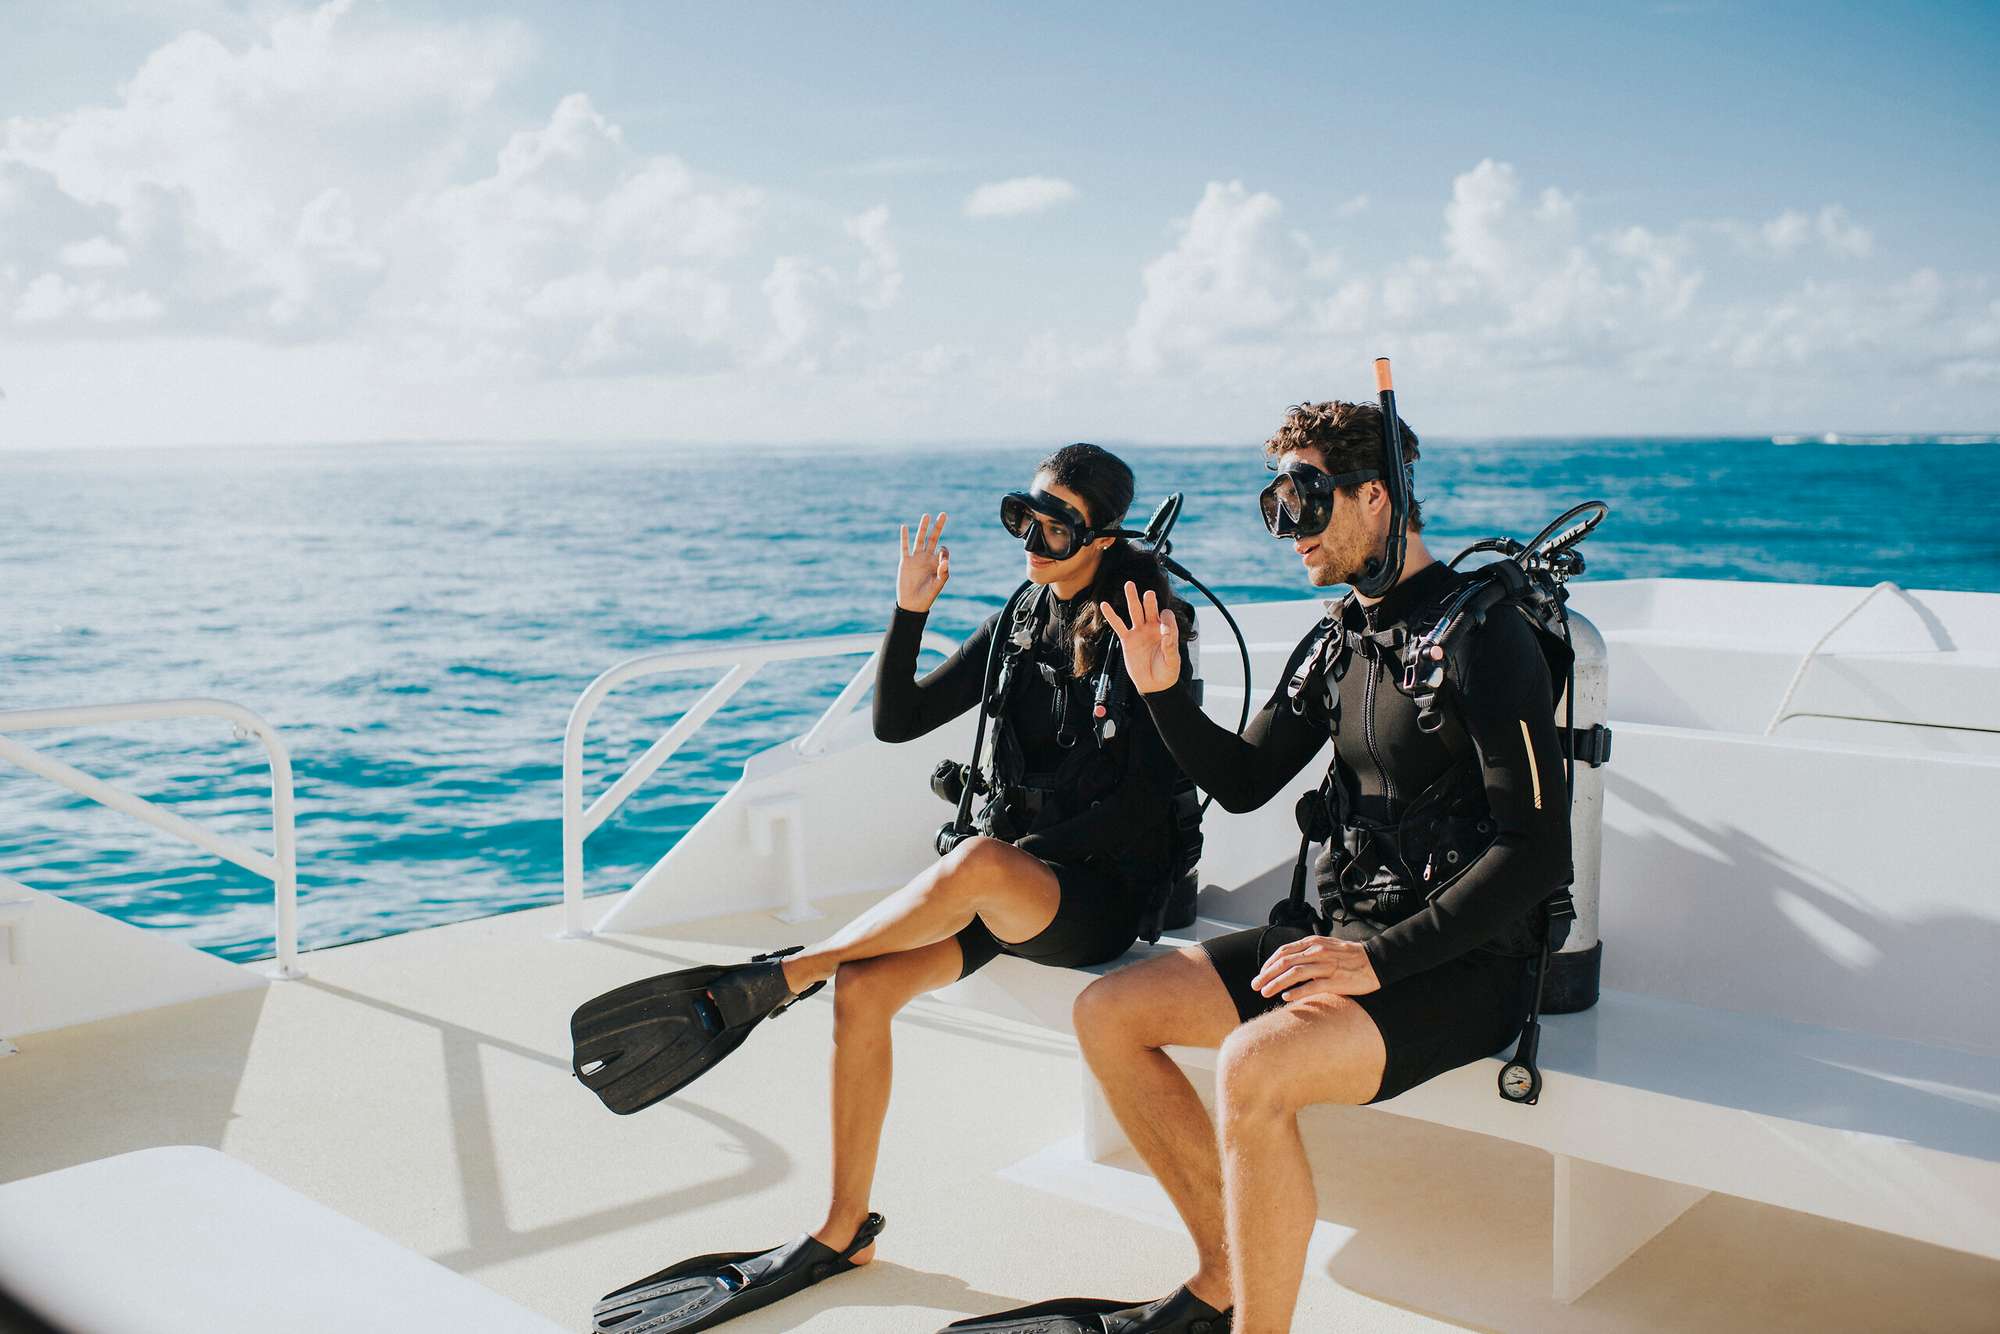 turks and Caicos diving